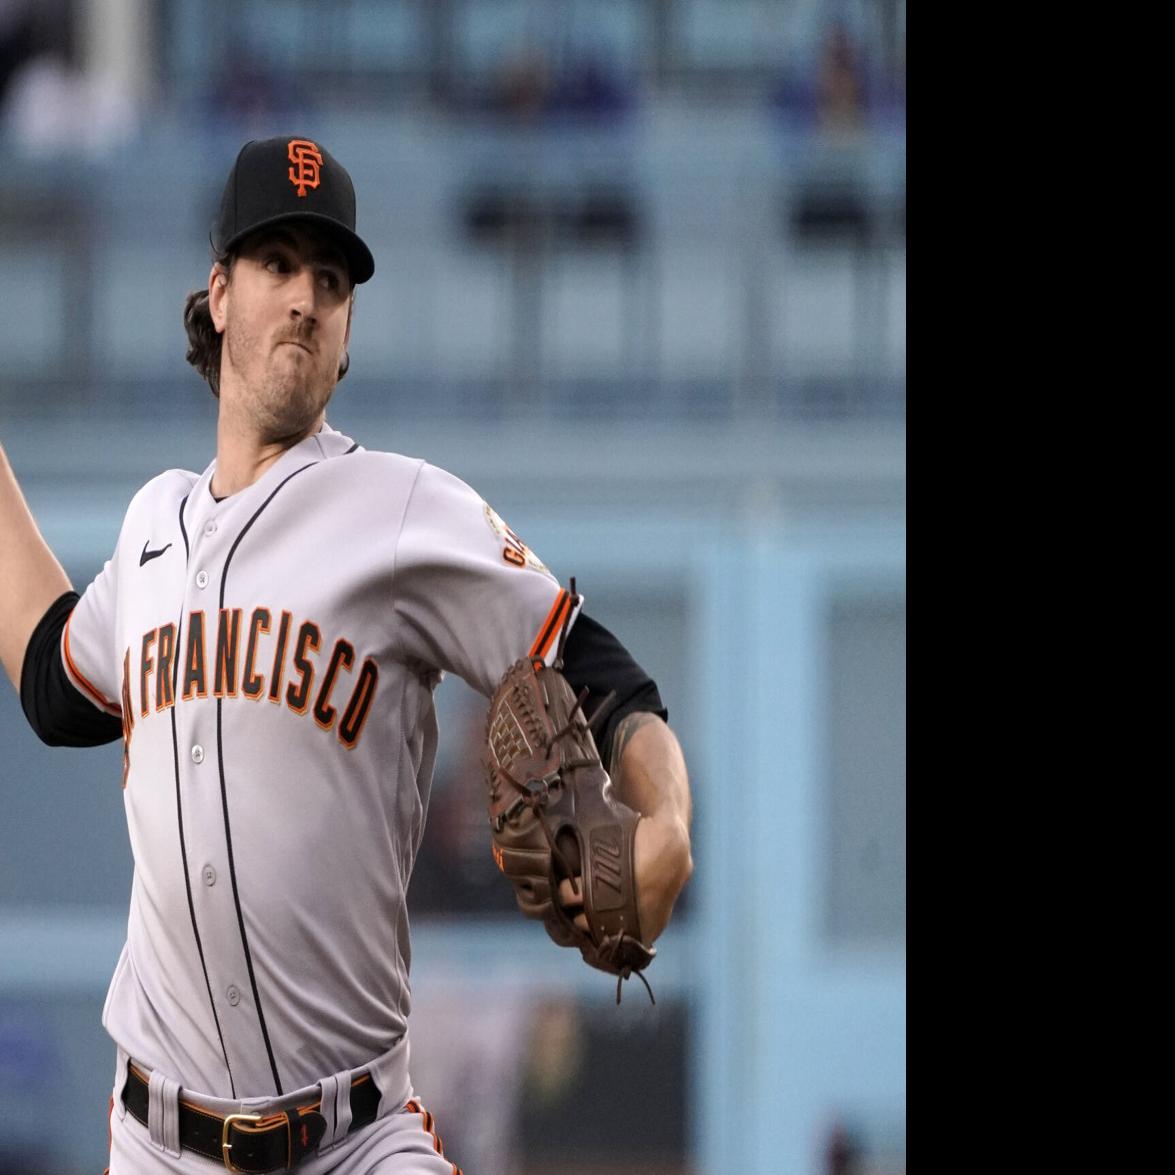 It's time for the Giants to extend Kevin Gausman's contract - The